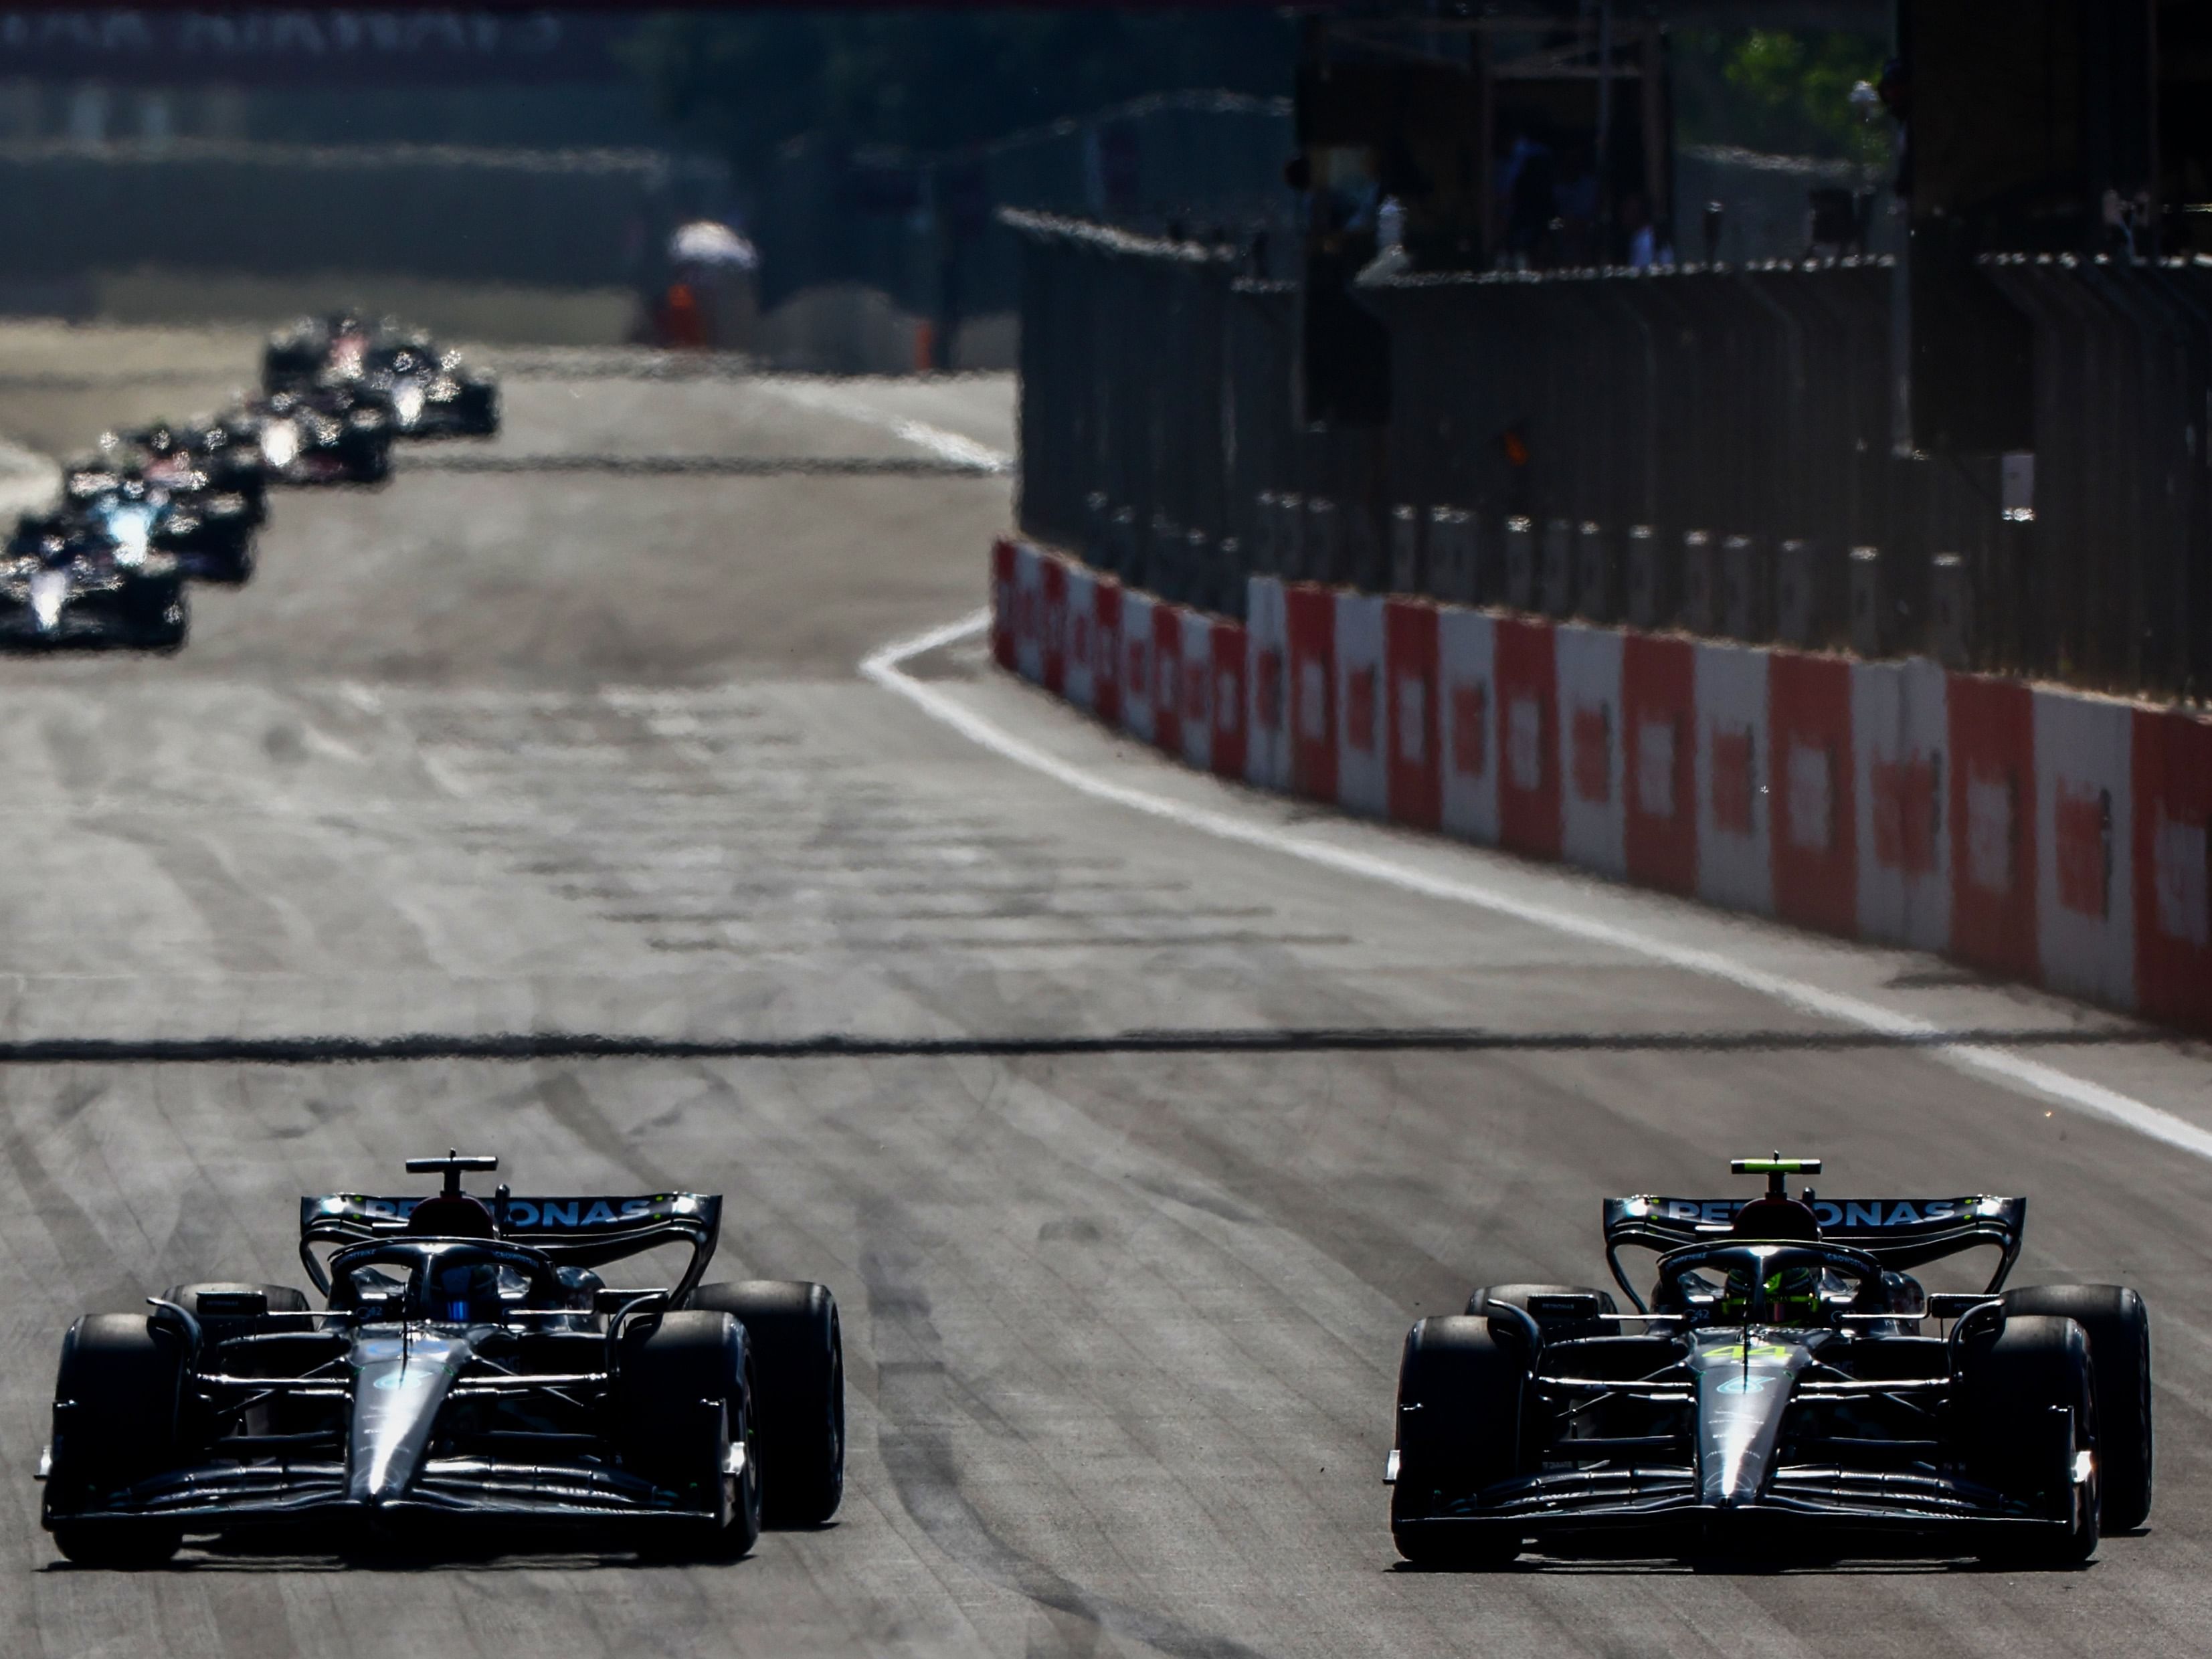 F1 Grand Prix of AzerbaijanGeorge Russell (63) and Lewis Hamilton (44) on track during the 2023 F1 Azerbaijan Grand Prix. (Photo by Mark Thompson/Getty Images)